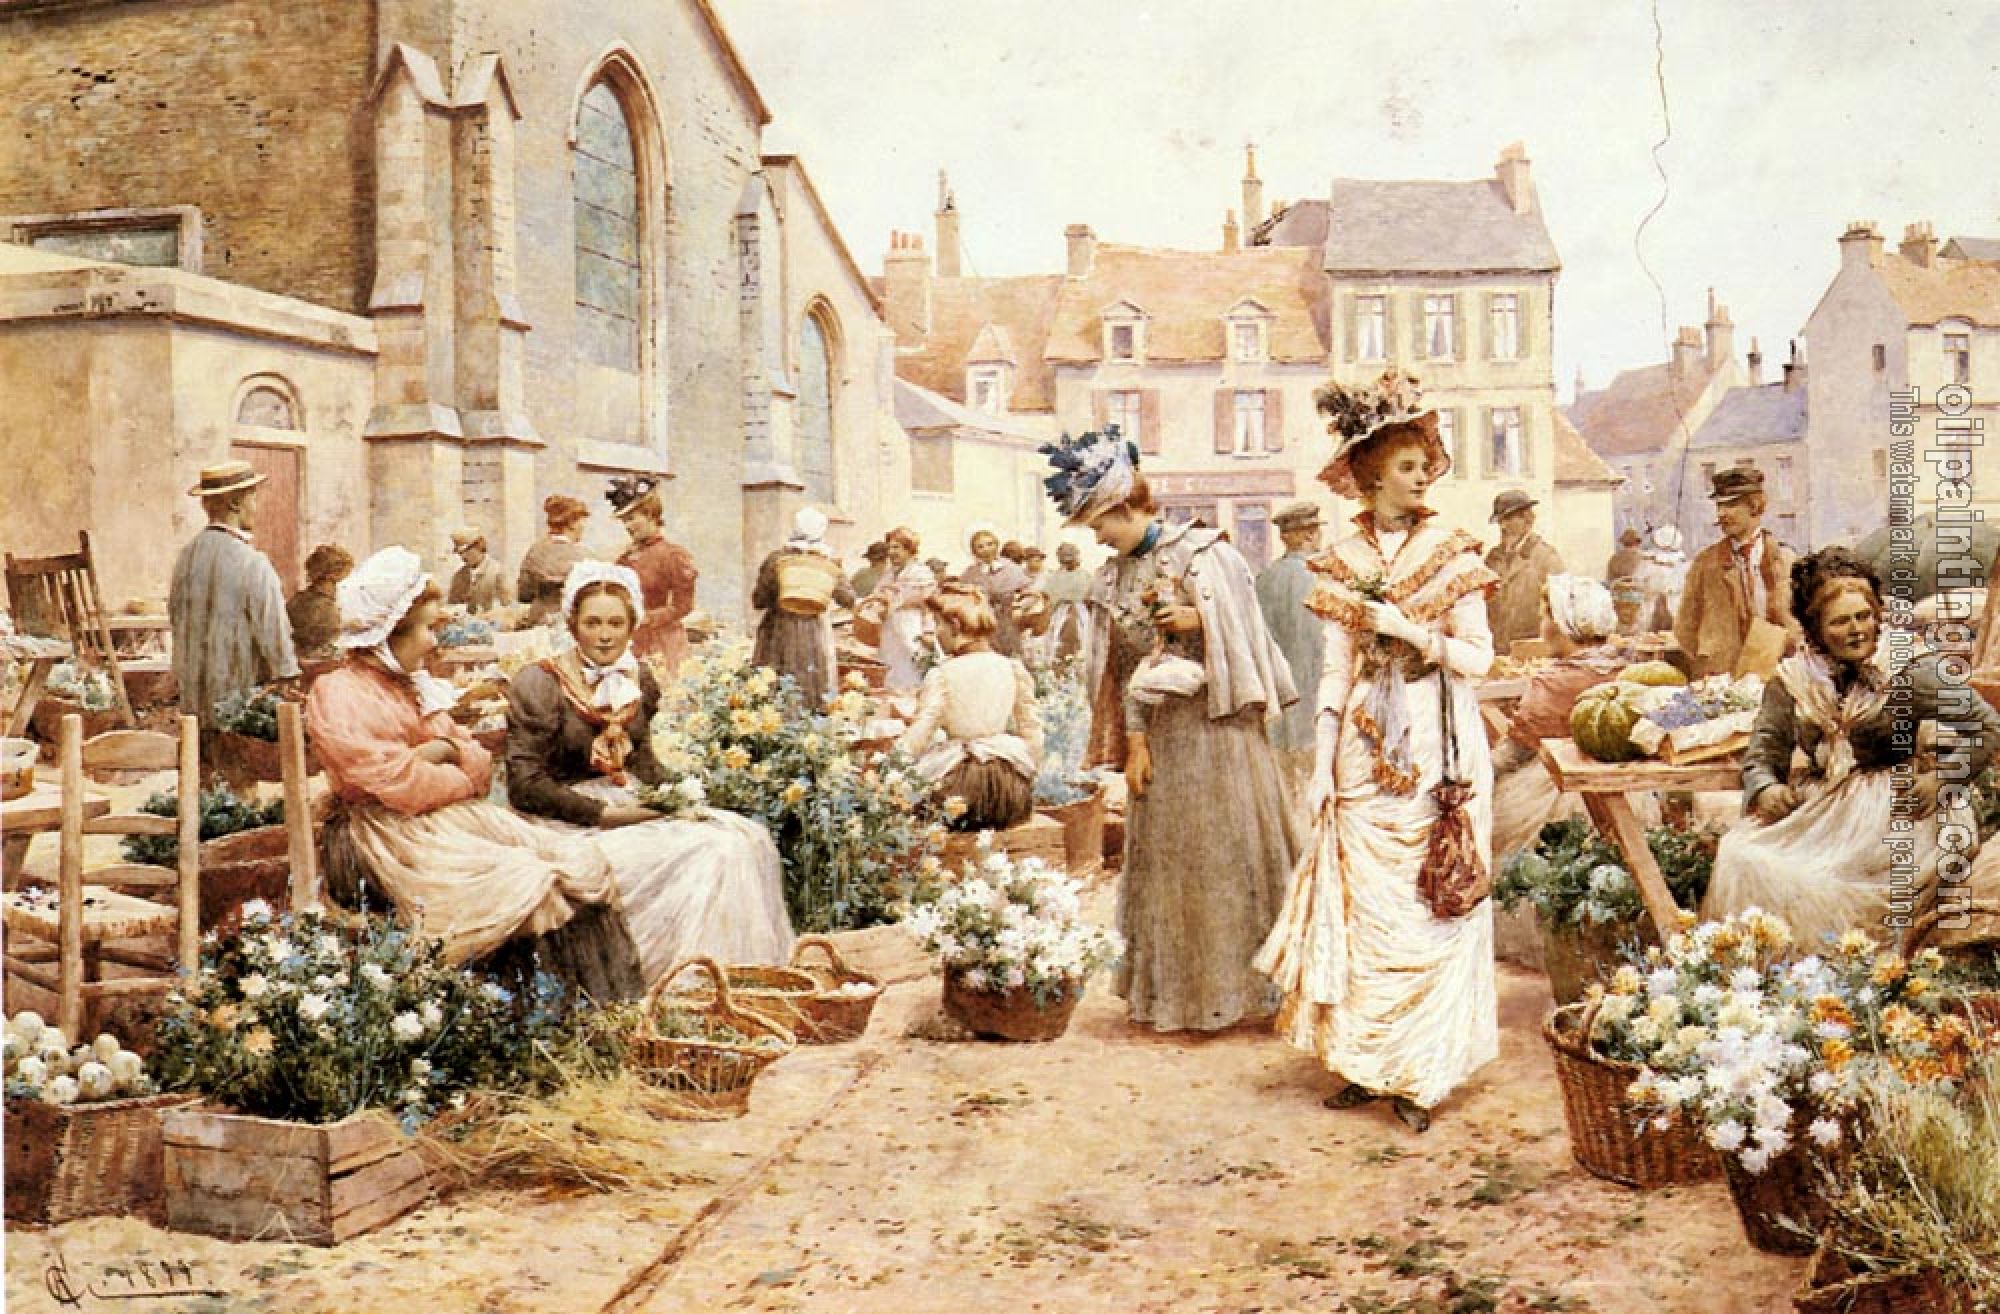 Glendening, Alfred - Flower Market in a French Town